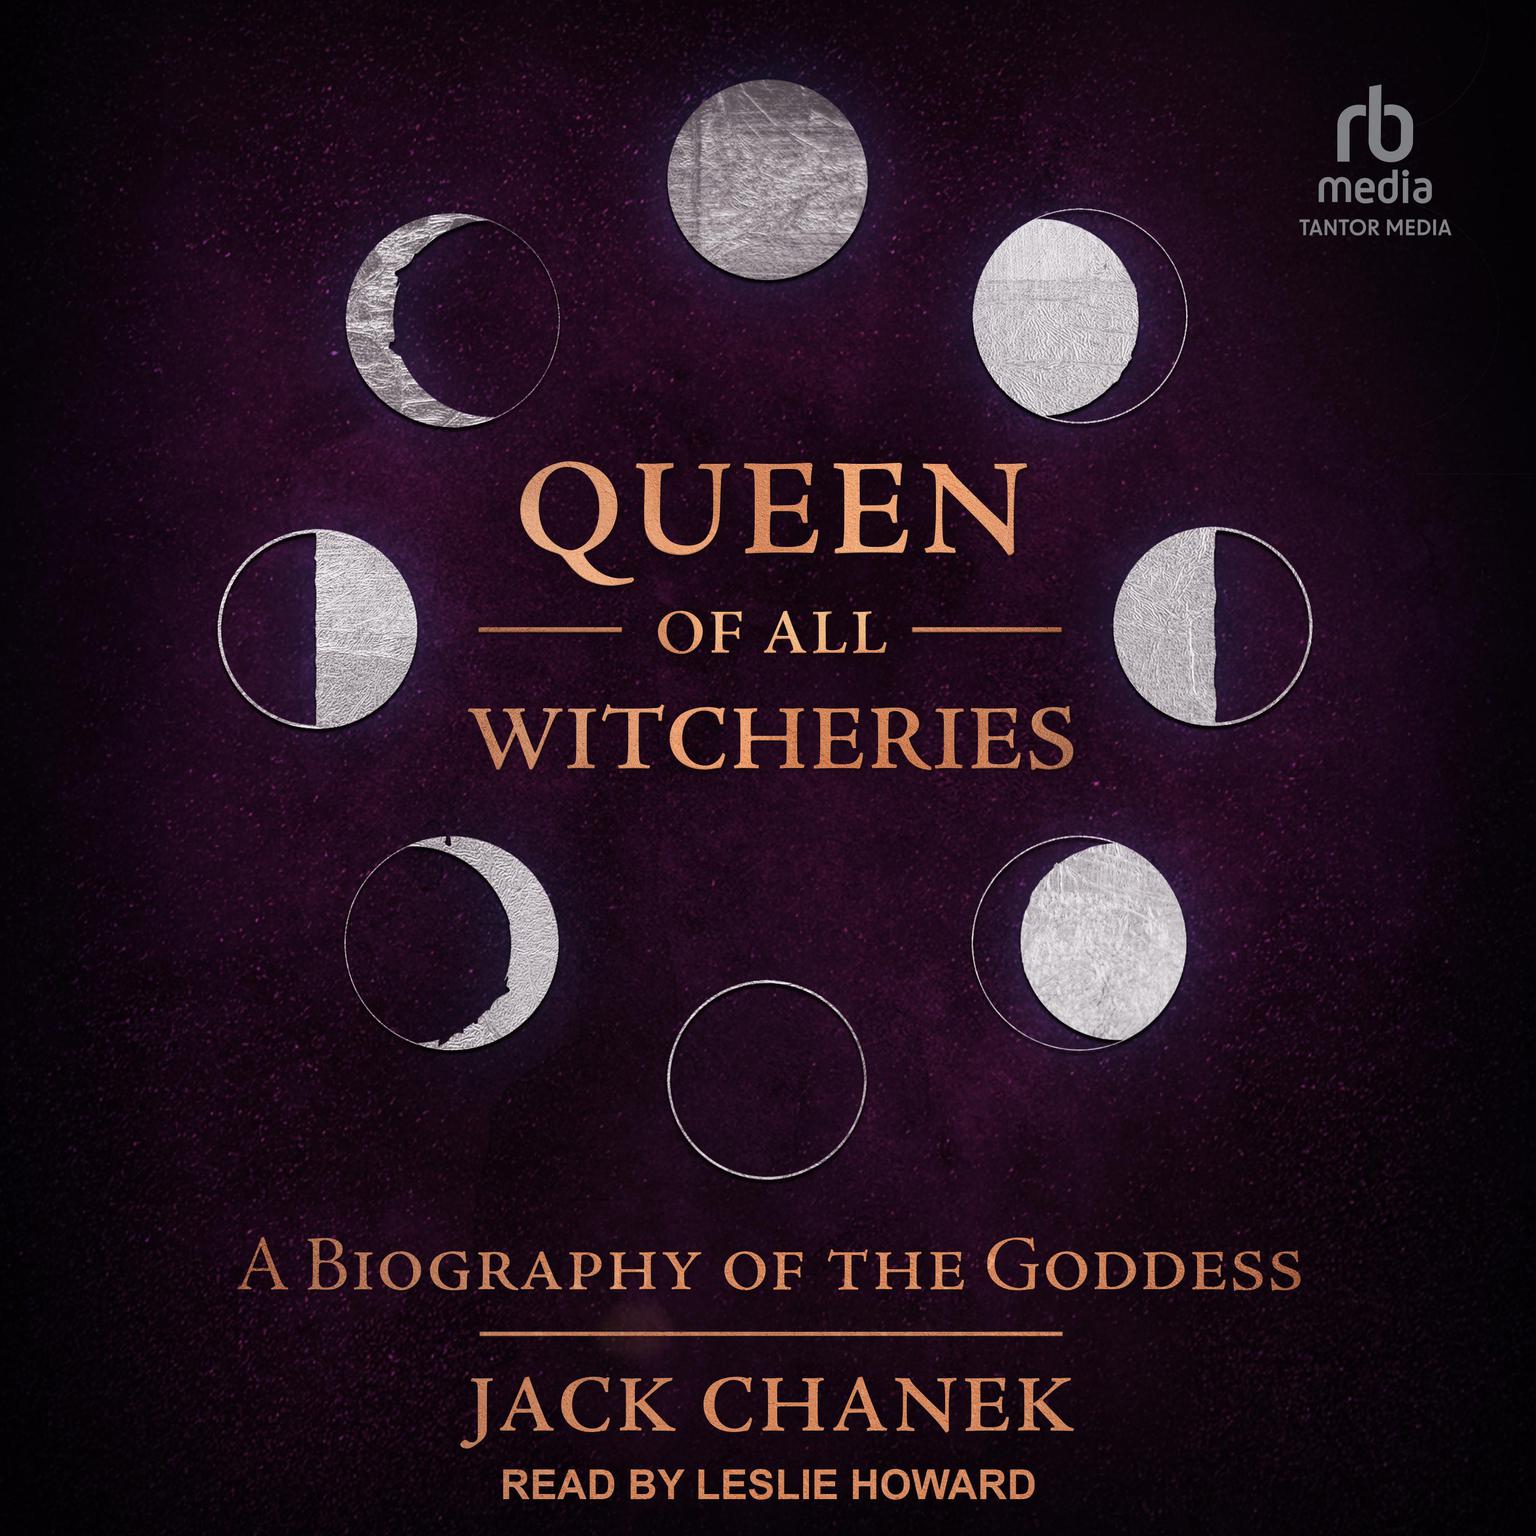 Queen of All Witcheries: A Biography of the Goddess Audiobook, by Jack Chanek